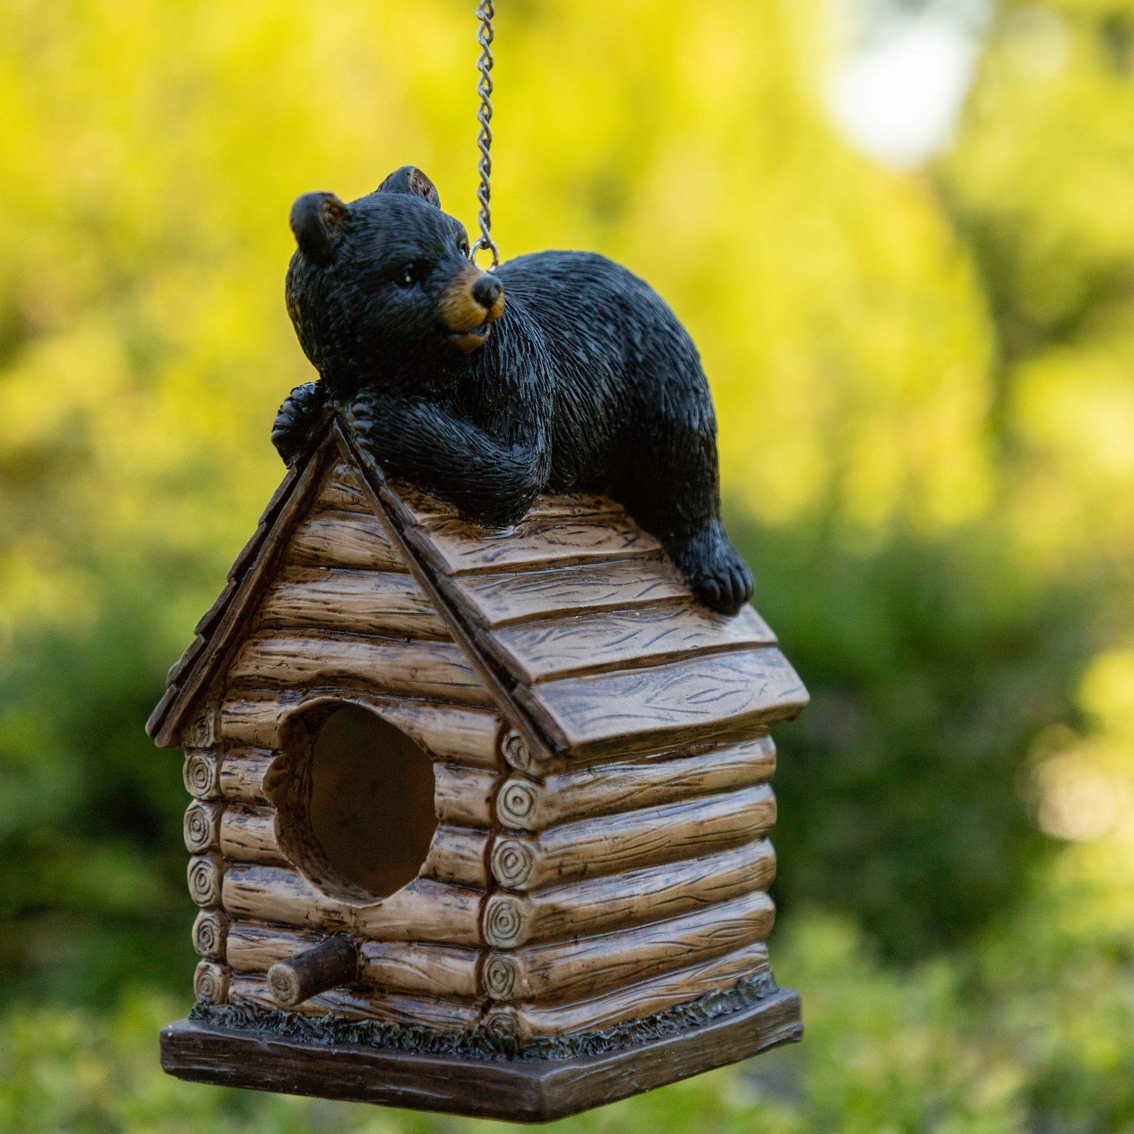 Alpine Resting Bear on Log Cabin Birdhouse, 8 in. Tall - Image 2 of 5